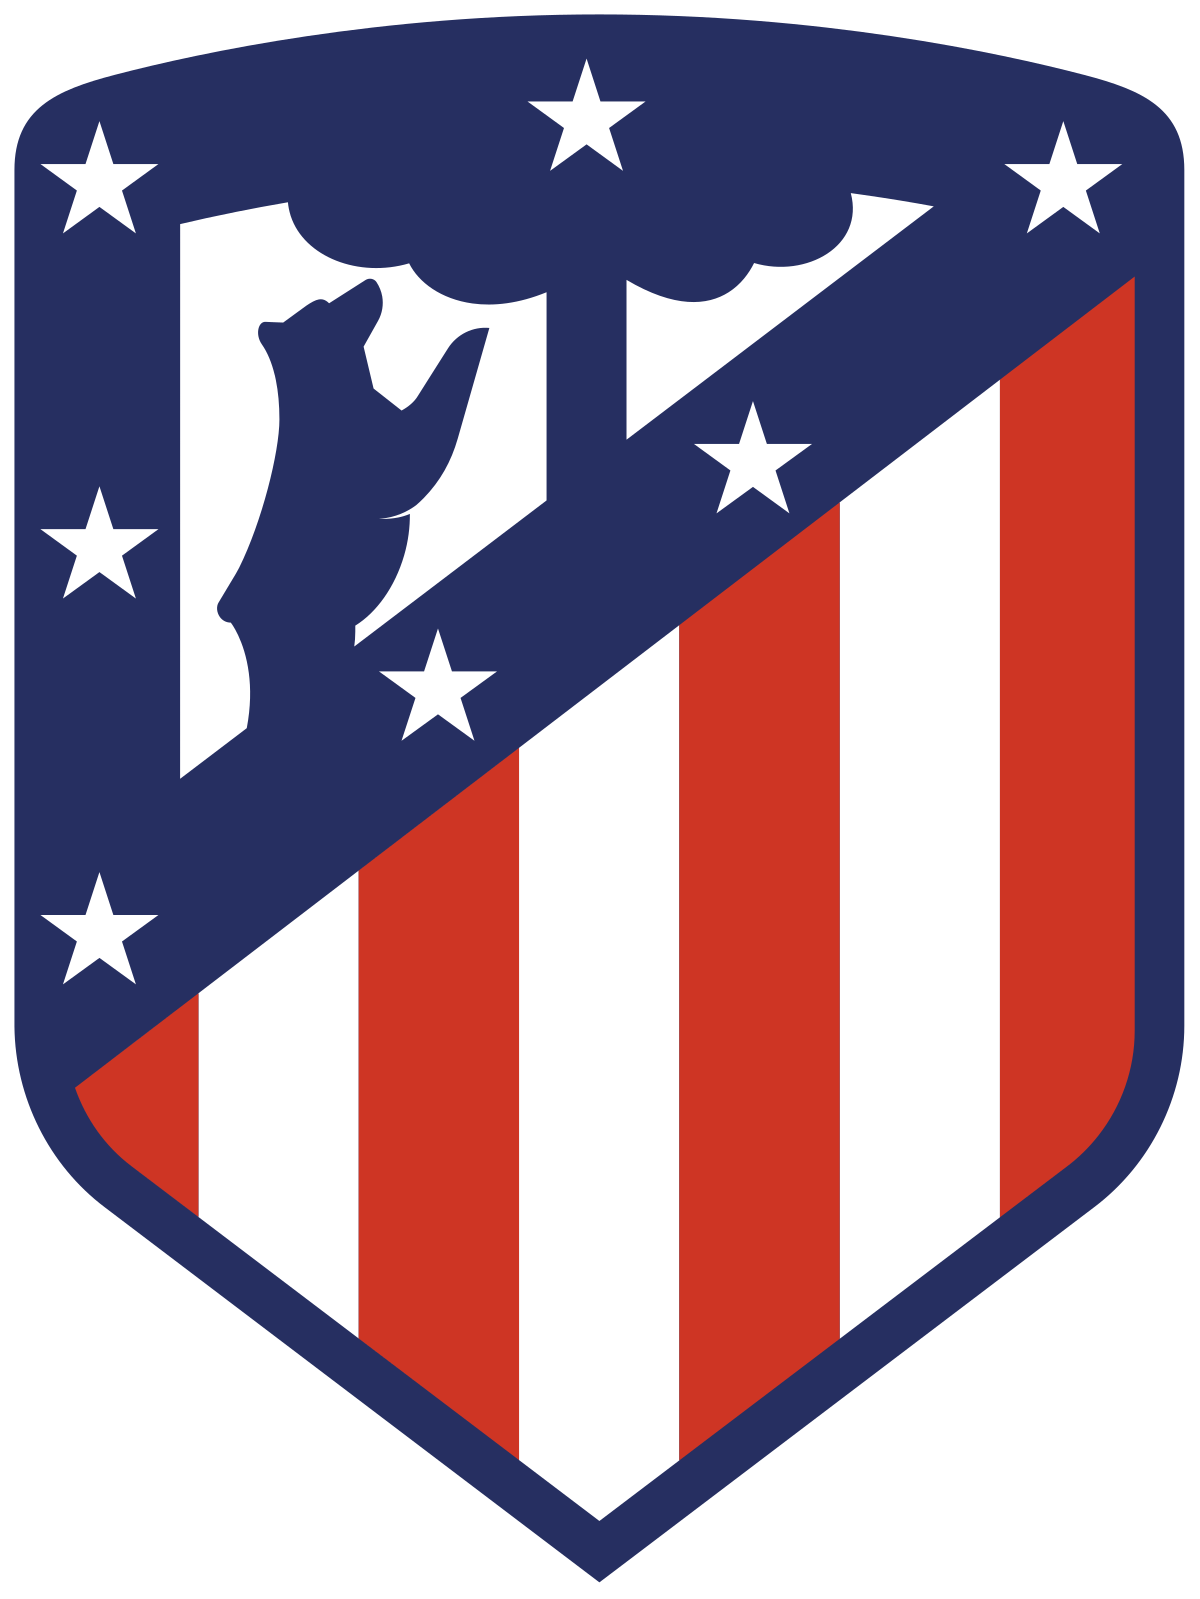 <strong>Atletico Madrid</strong>